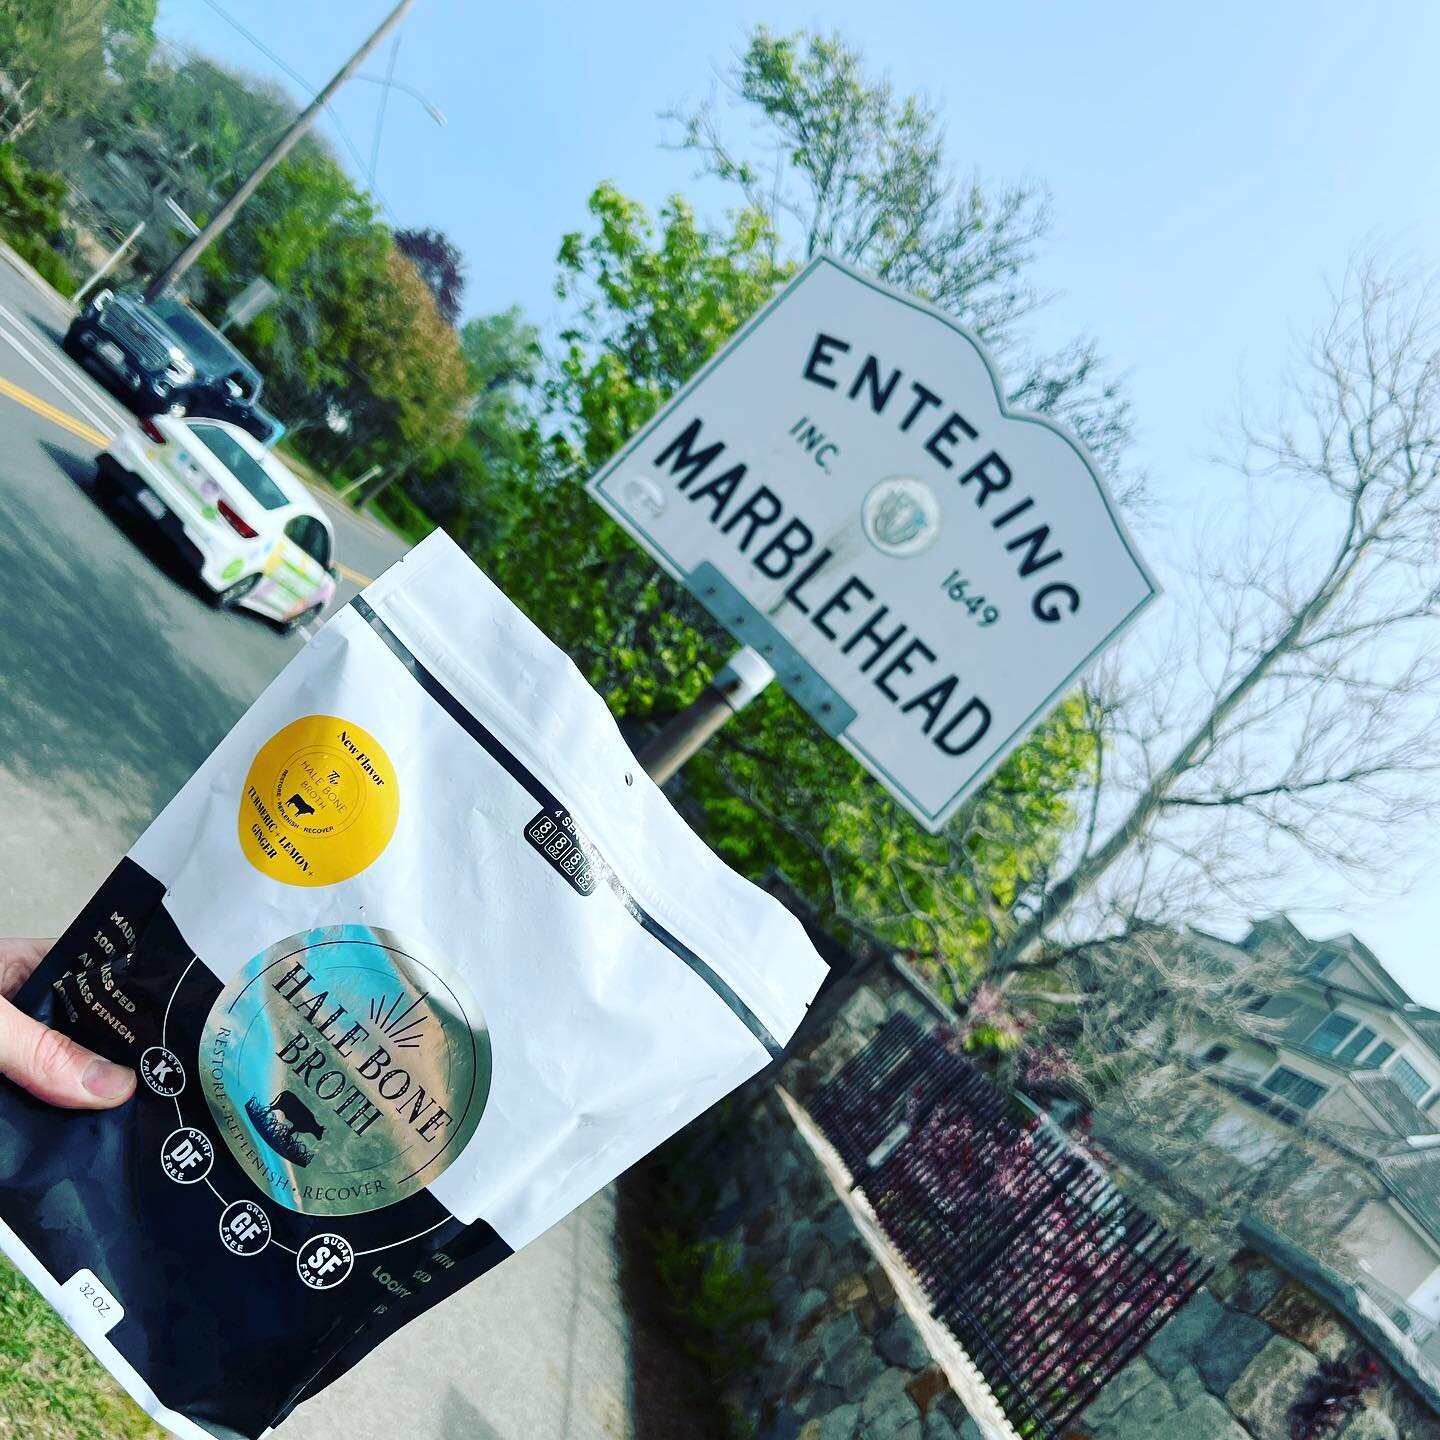 Hale is getting around! Hello Marblehead. We love finding local shops to have as retail partners 💛#marblehead #massachusetts #madeinmass #getaround #hale #thehalelife #bonebroth @shubies